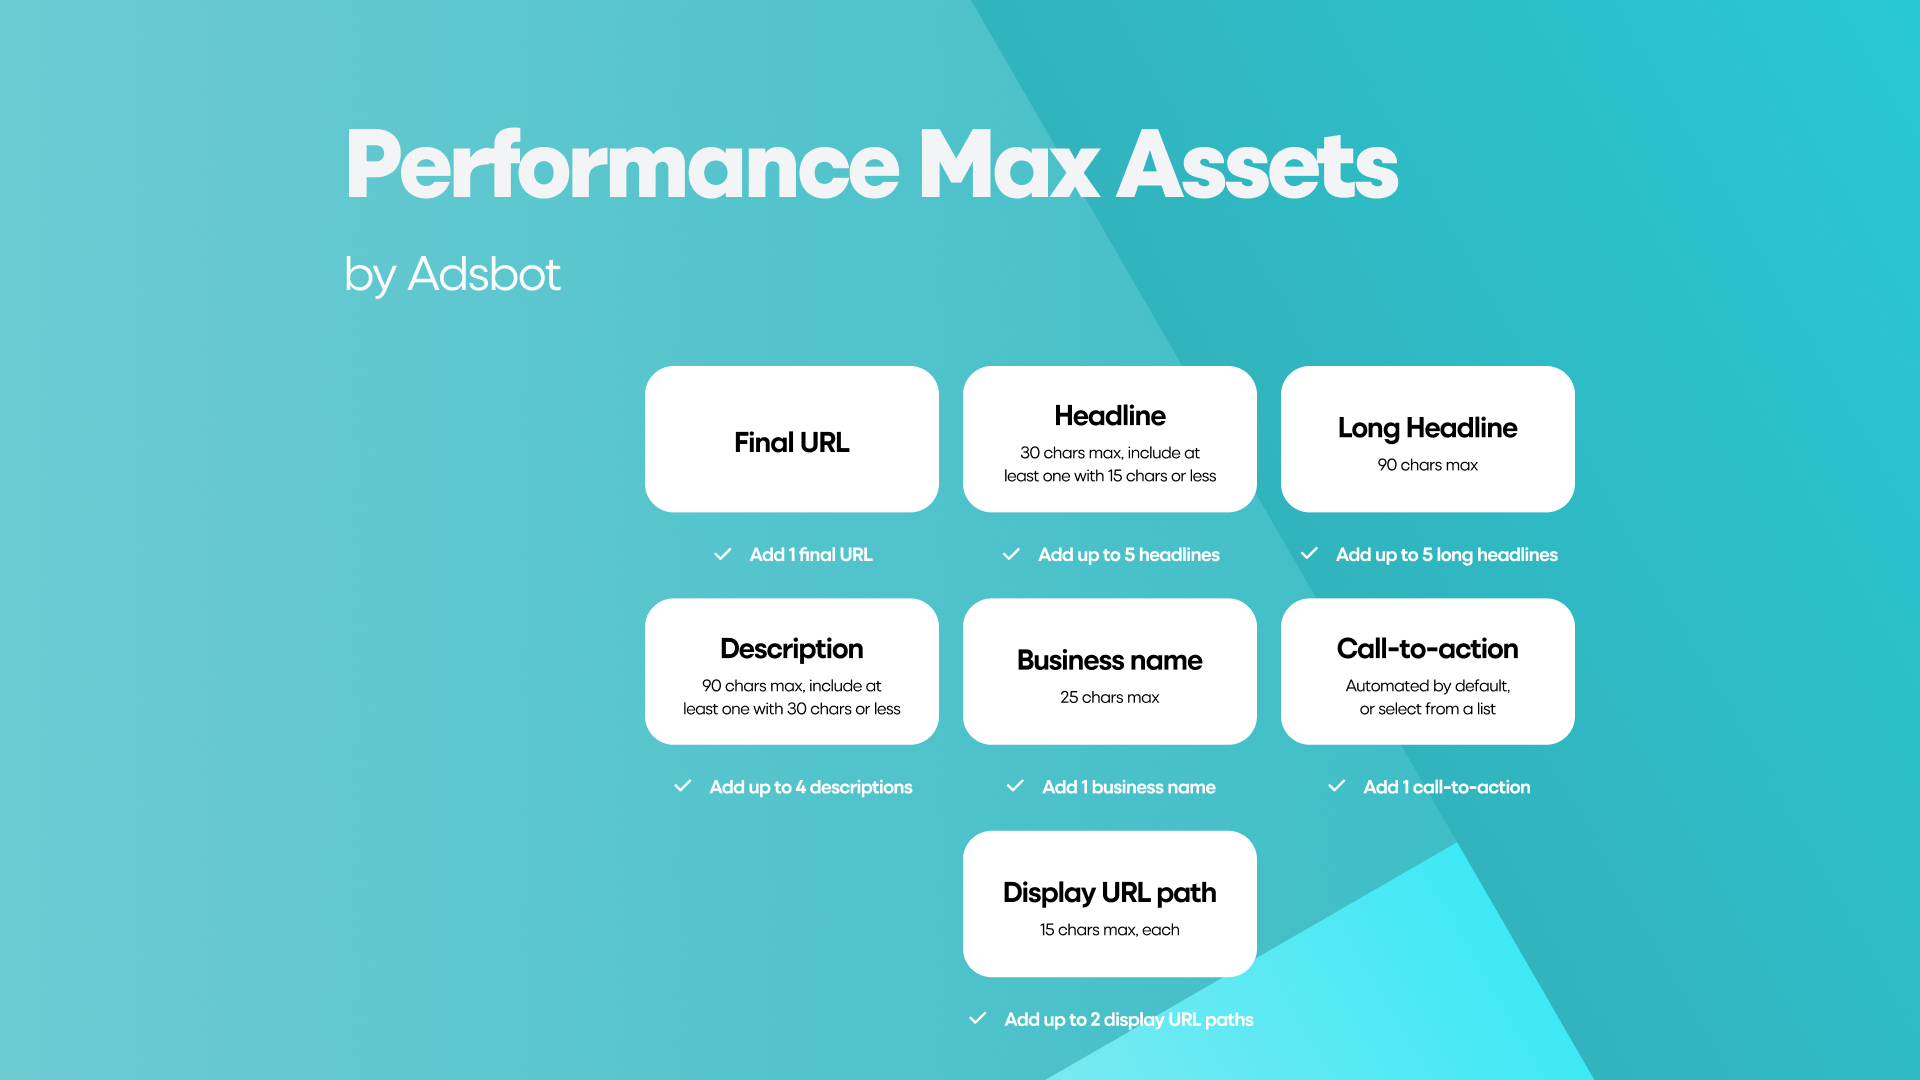 What is a Performance Max Asset